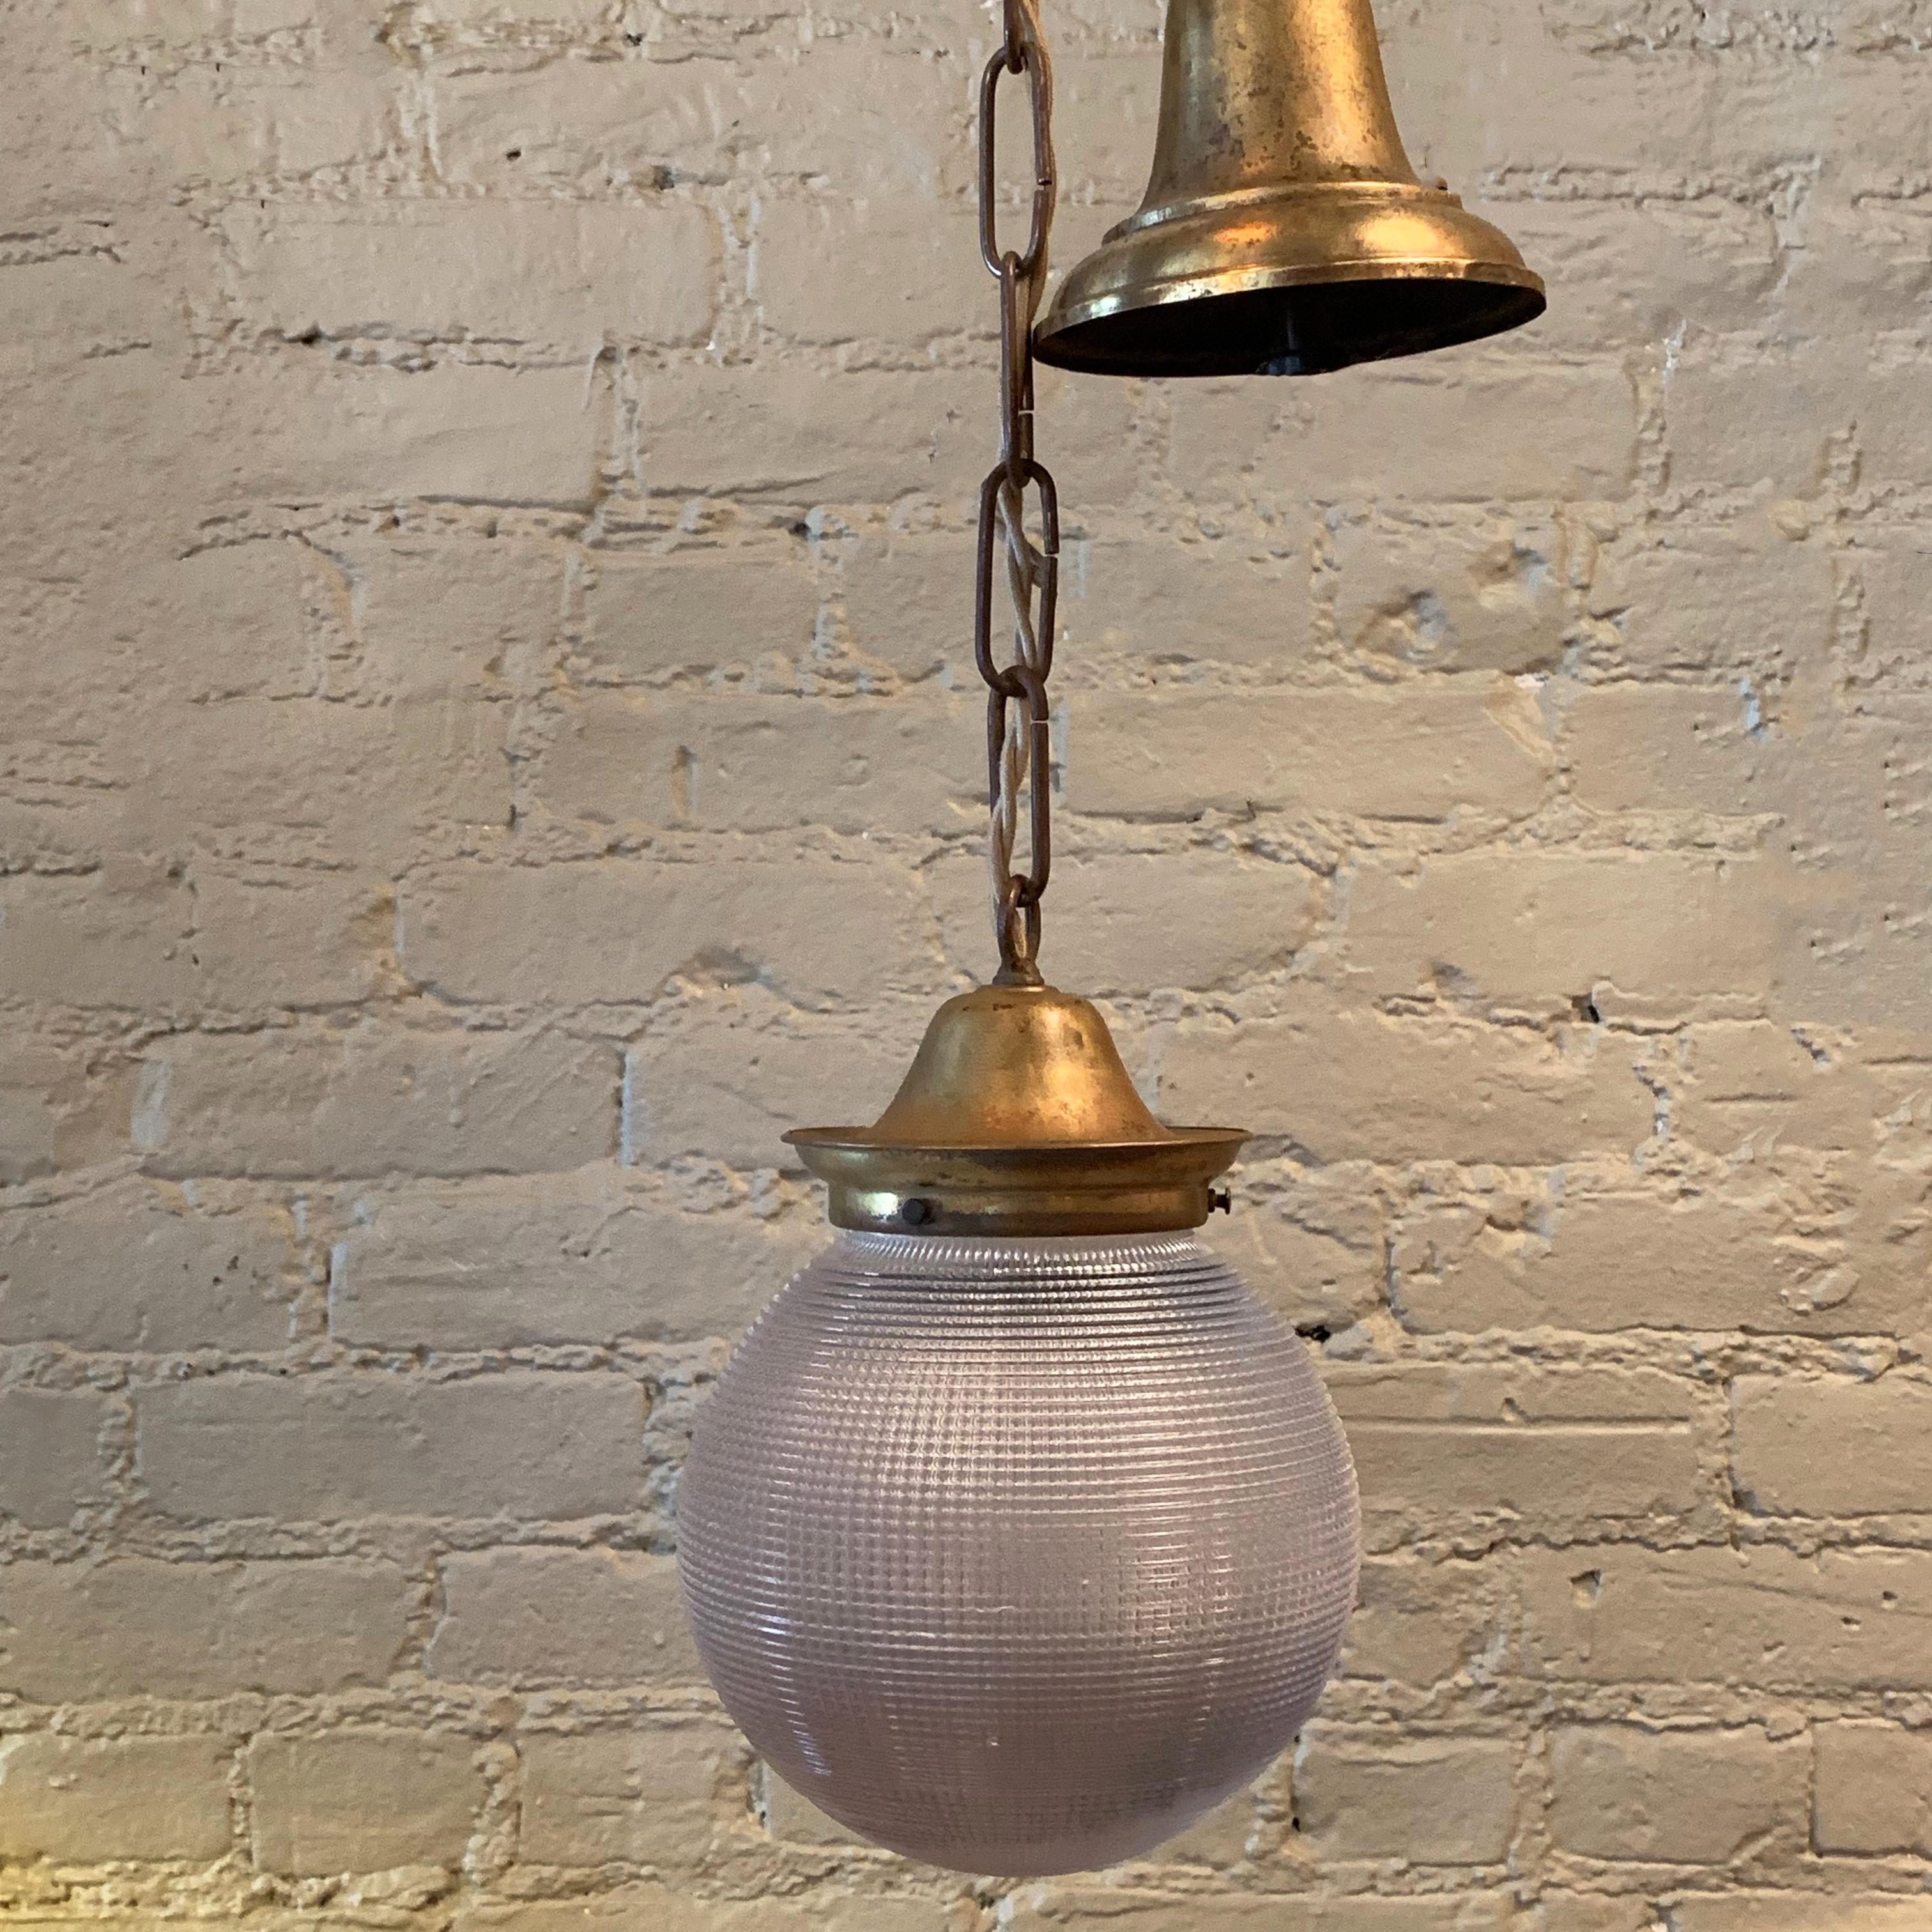 Early 20th century, industrial pendant light features a prismatic Holophane glass globe shade with a brass fitter, chain and ceiling canopy. The full hanging length if the pendant is 37 inches.